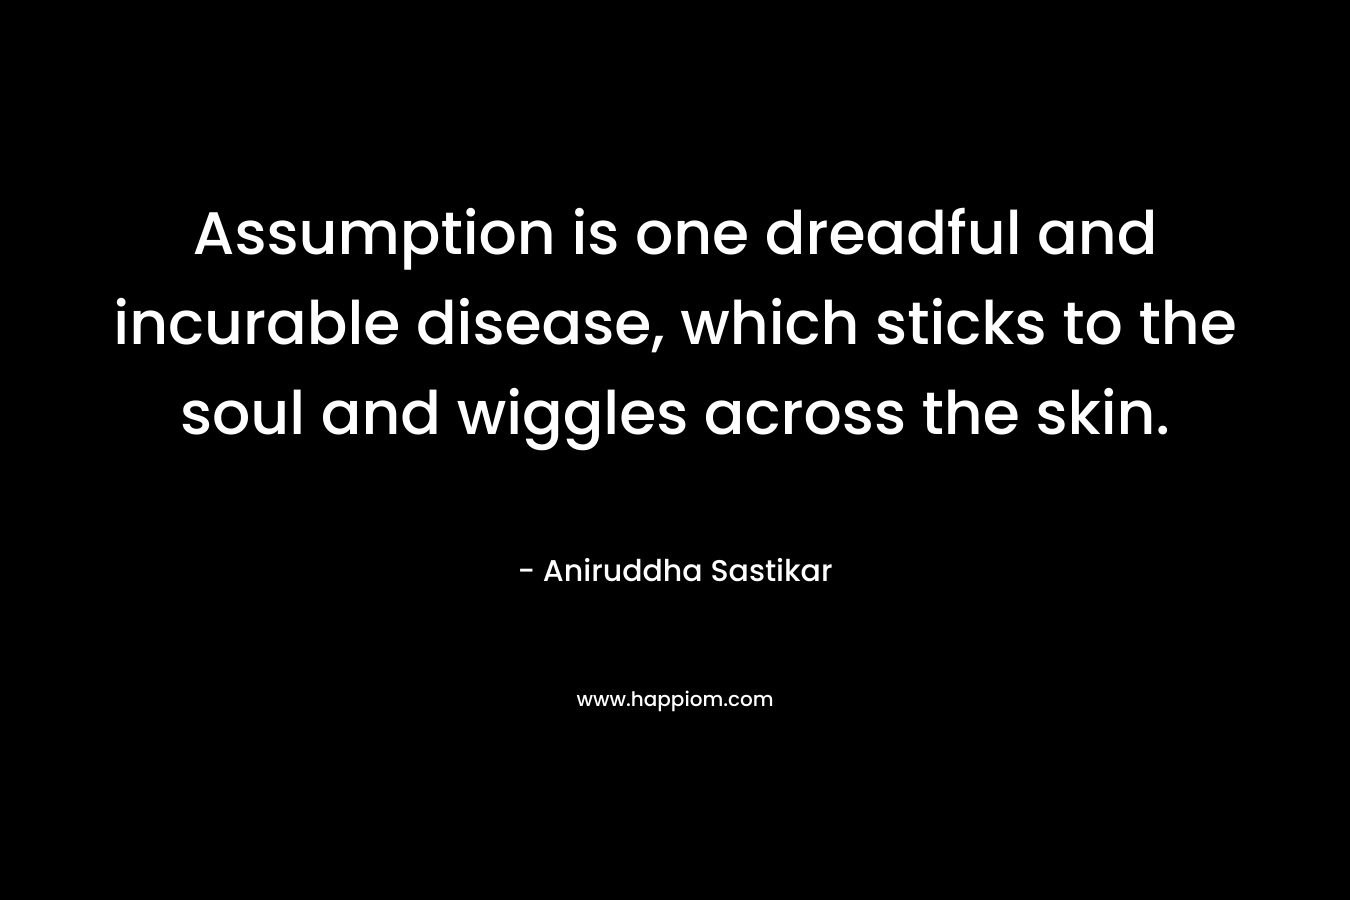 Assumption is one dreadful and incurable disease, which sticks to the soul and wiggles across the skin. – Aniruddha Sastikar